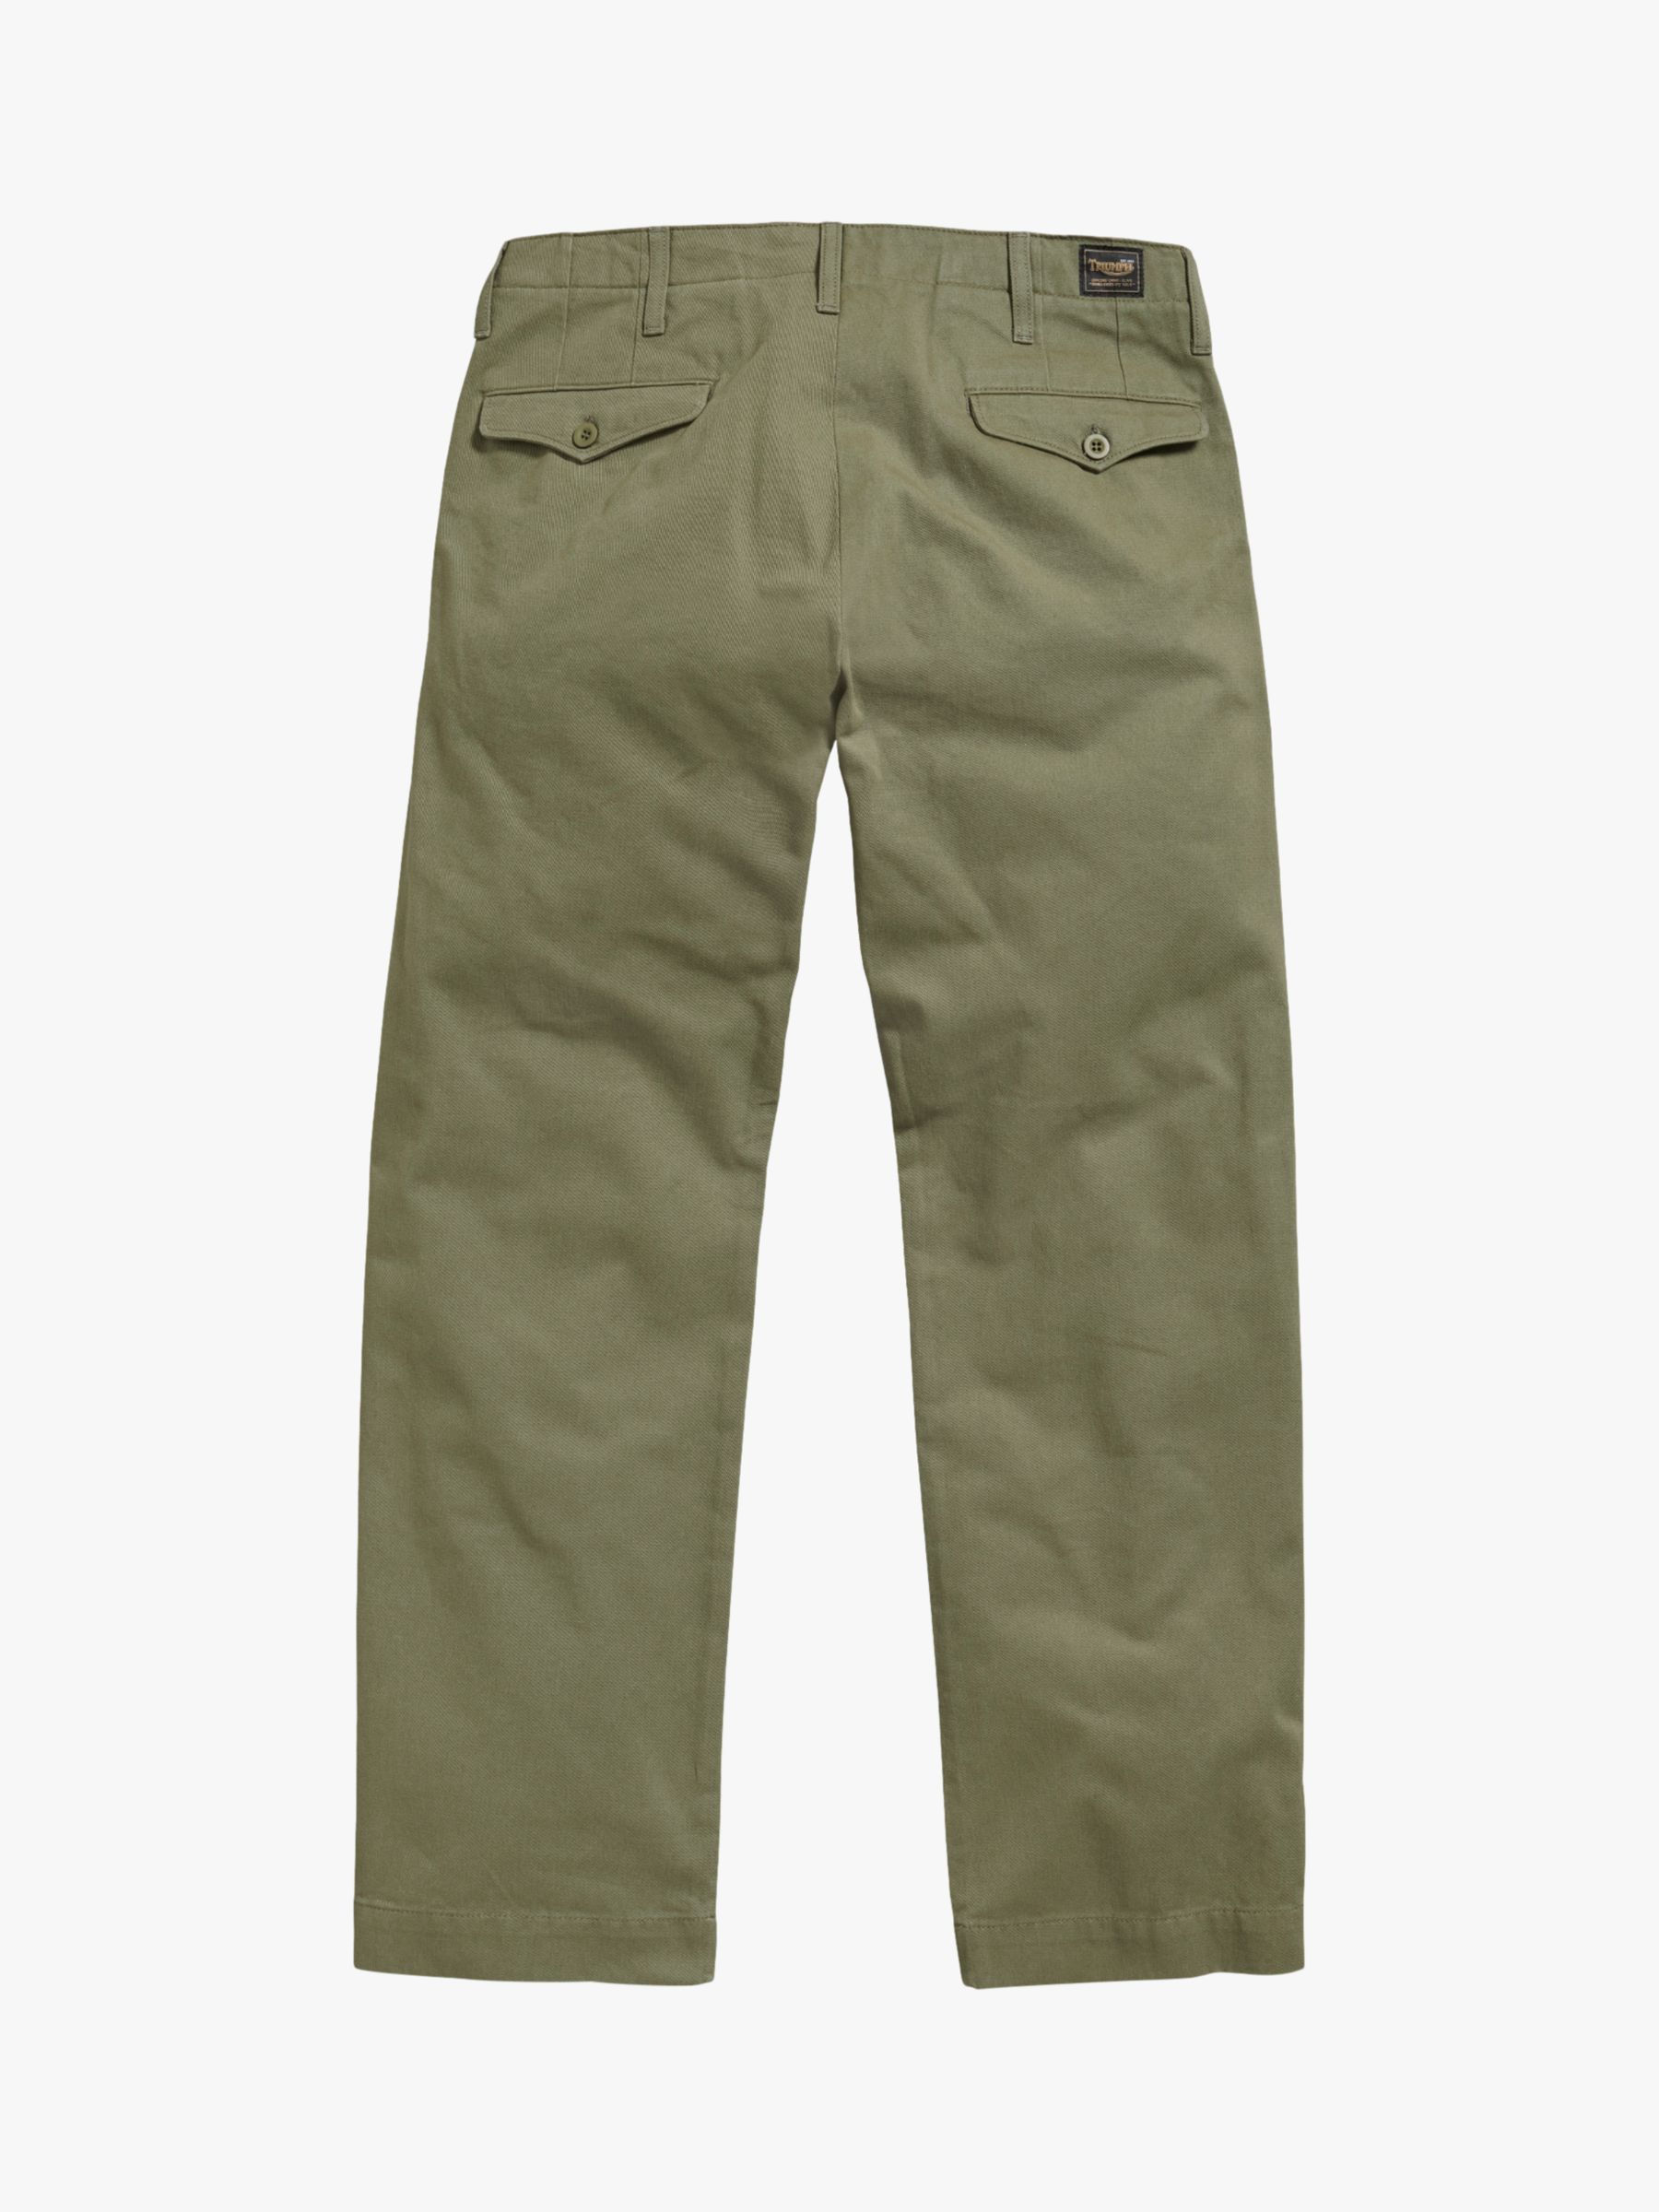 Buy Triumph Motorcycles Officer Chinos, Olive Online at johnlewis.com